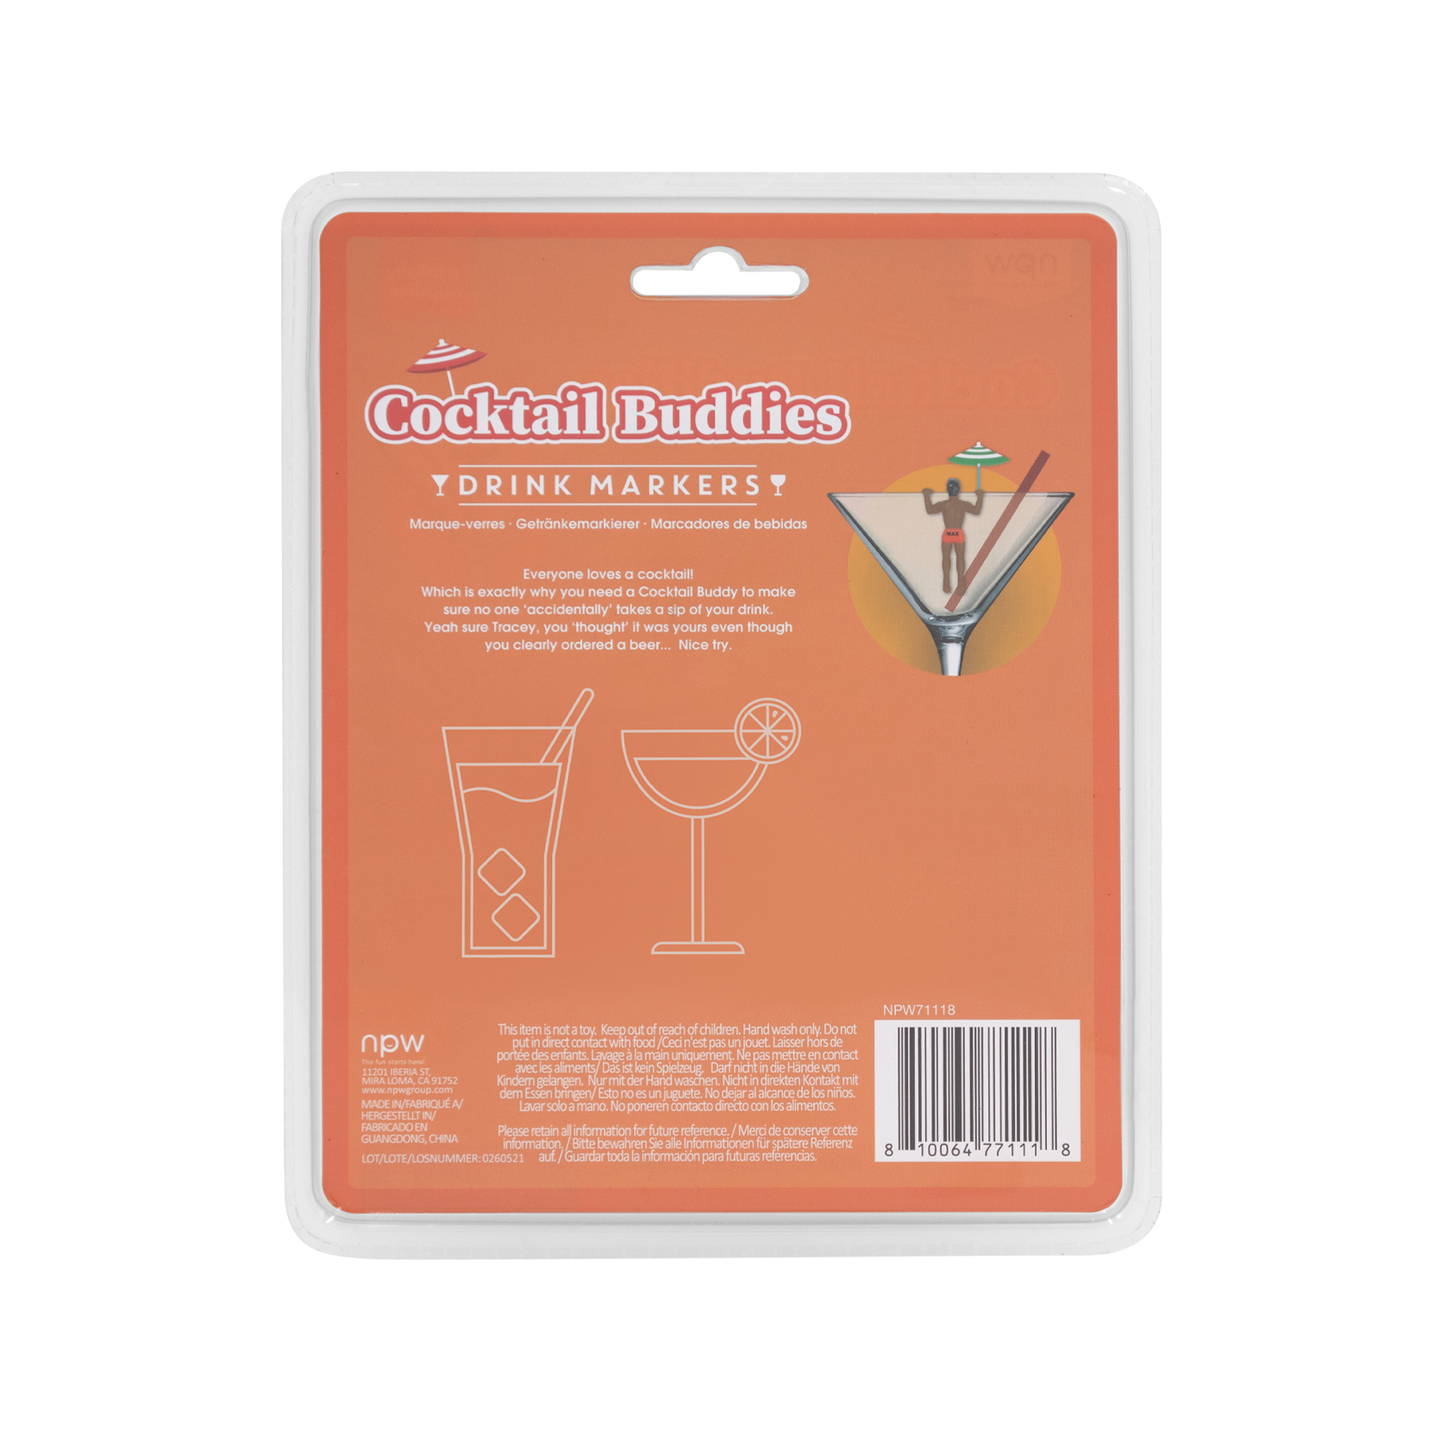 Cocktail Buddies Drink Markers